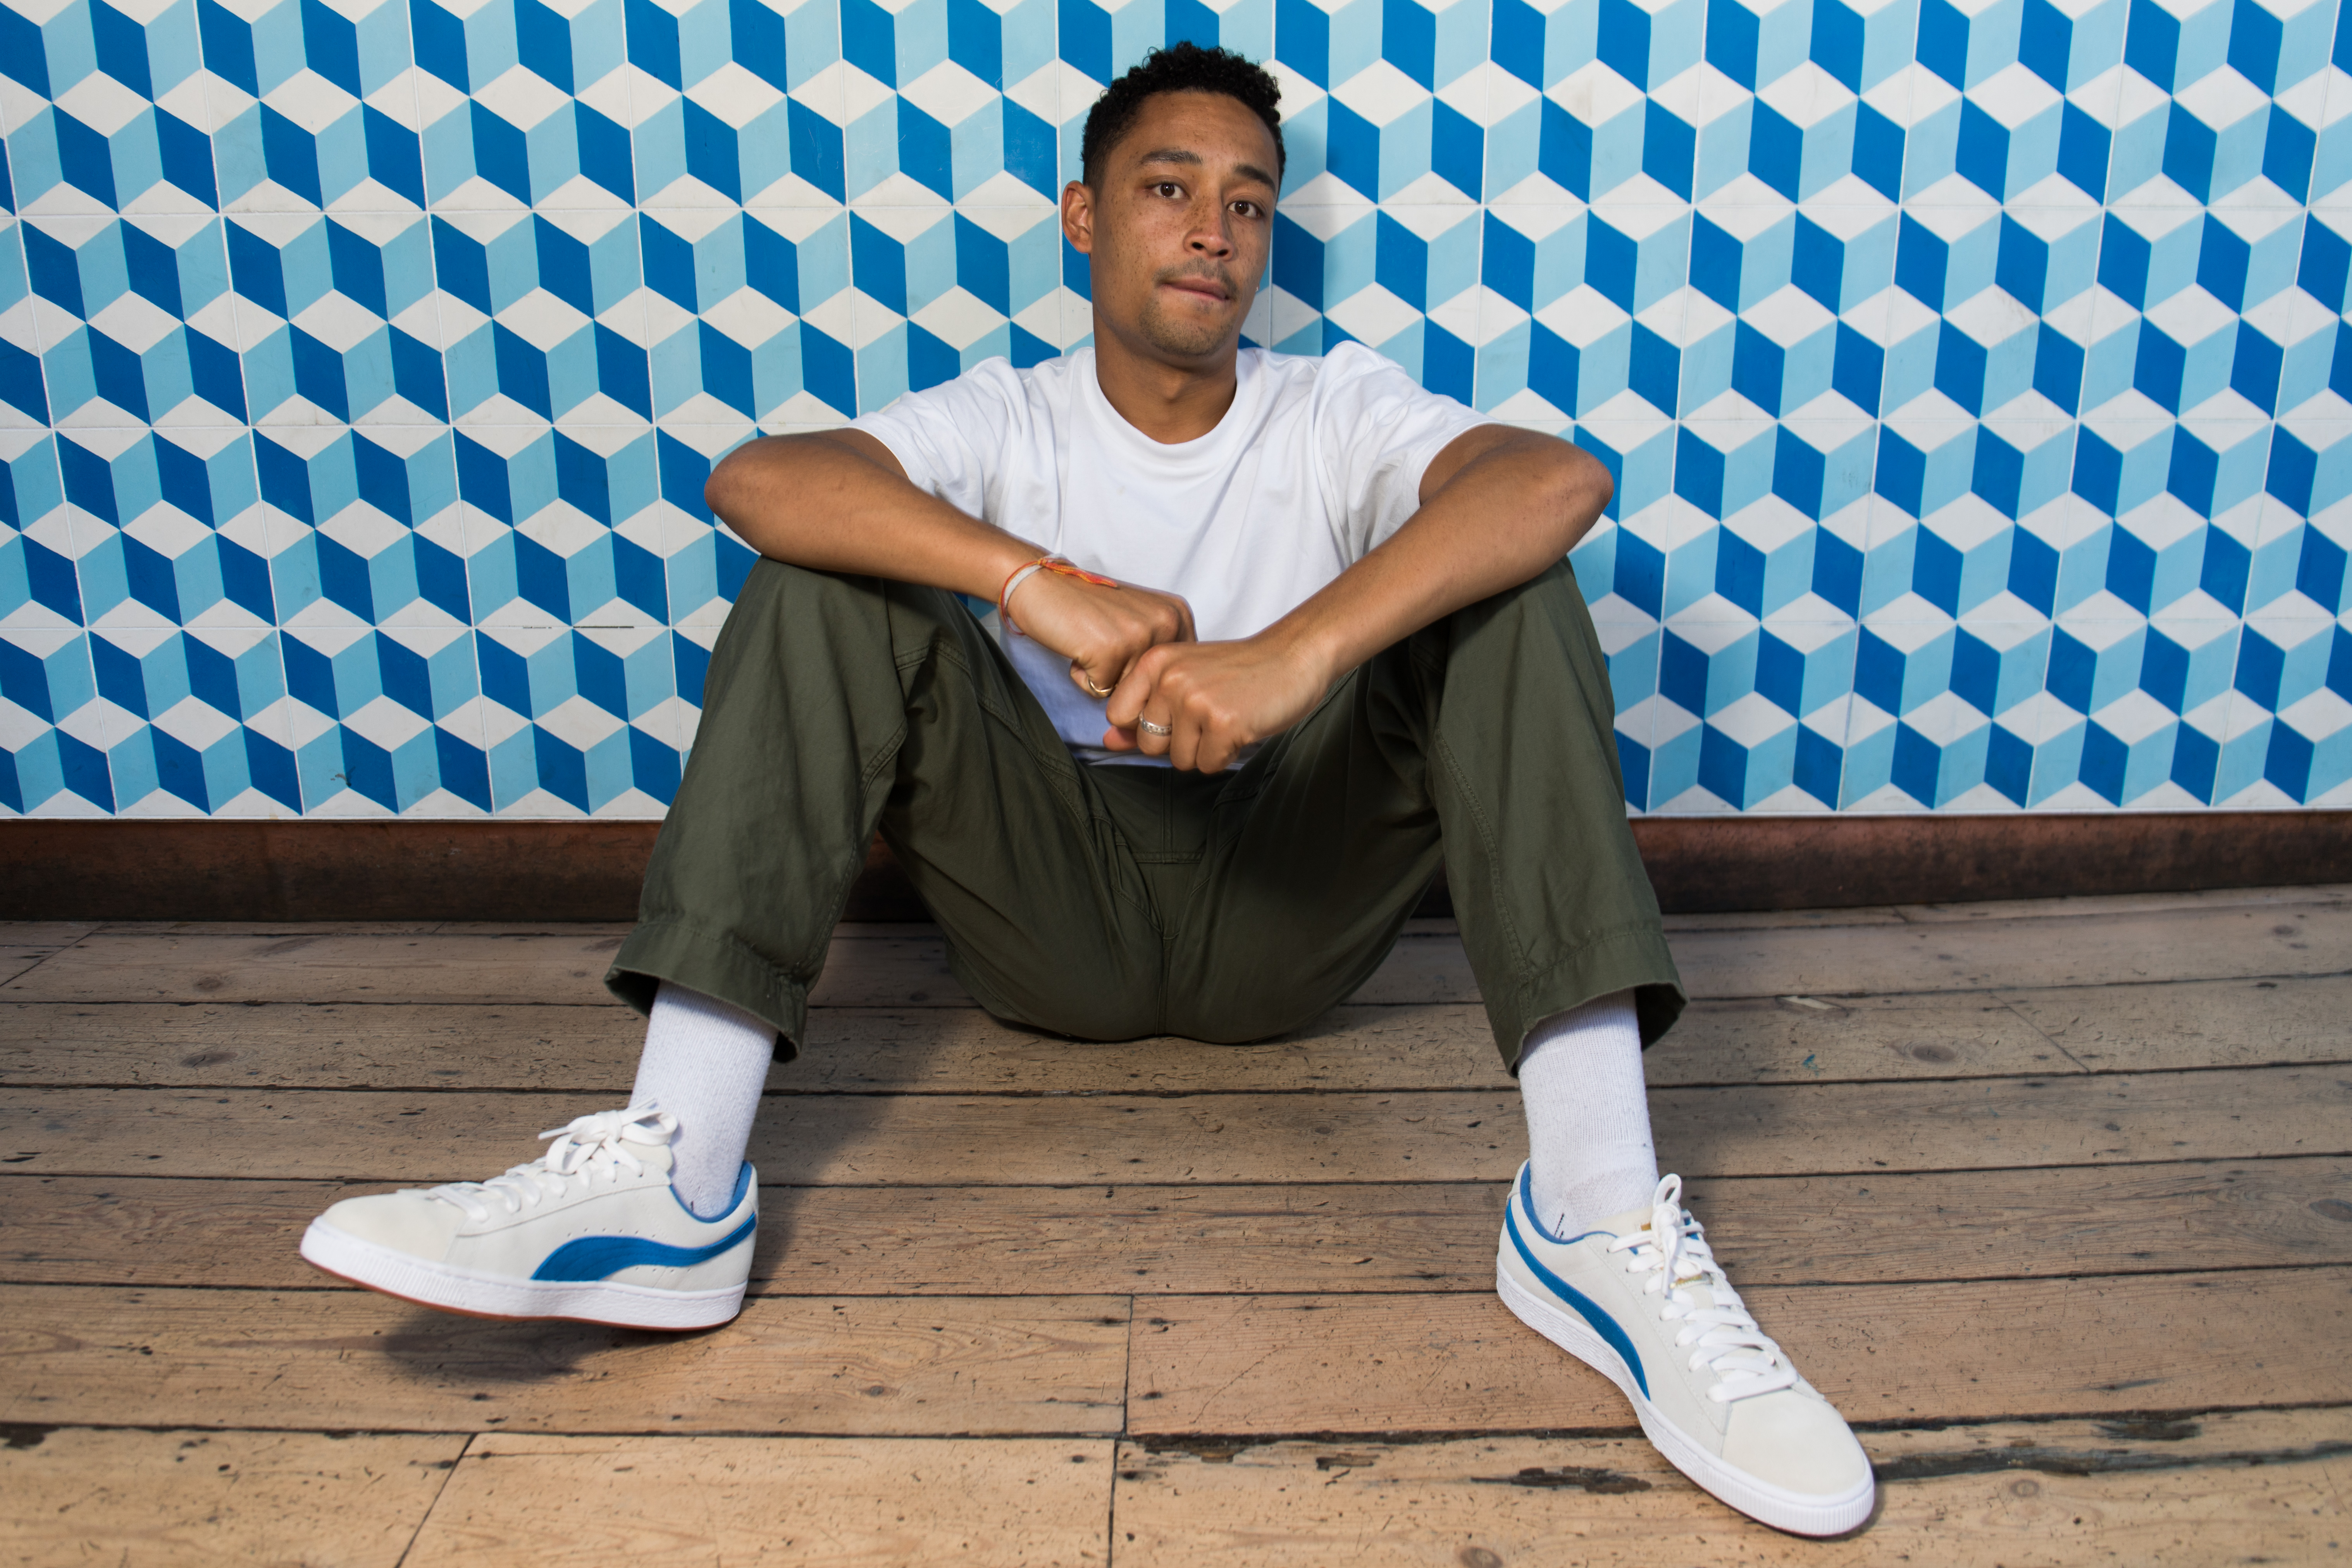 They Were My Headspin Shoes”: Loyle Carner Reflects On The PUMA